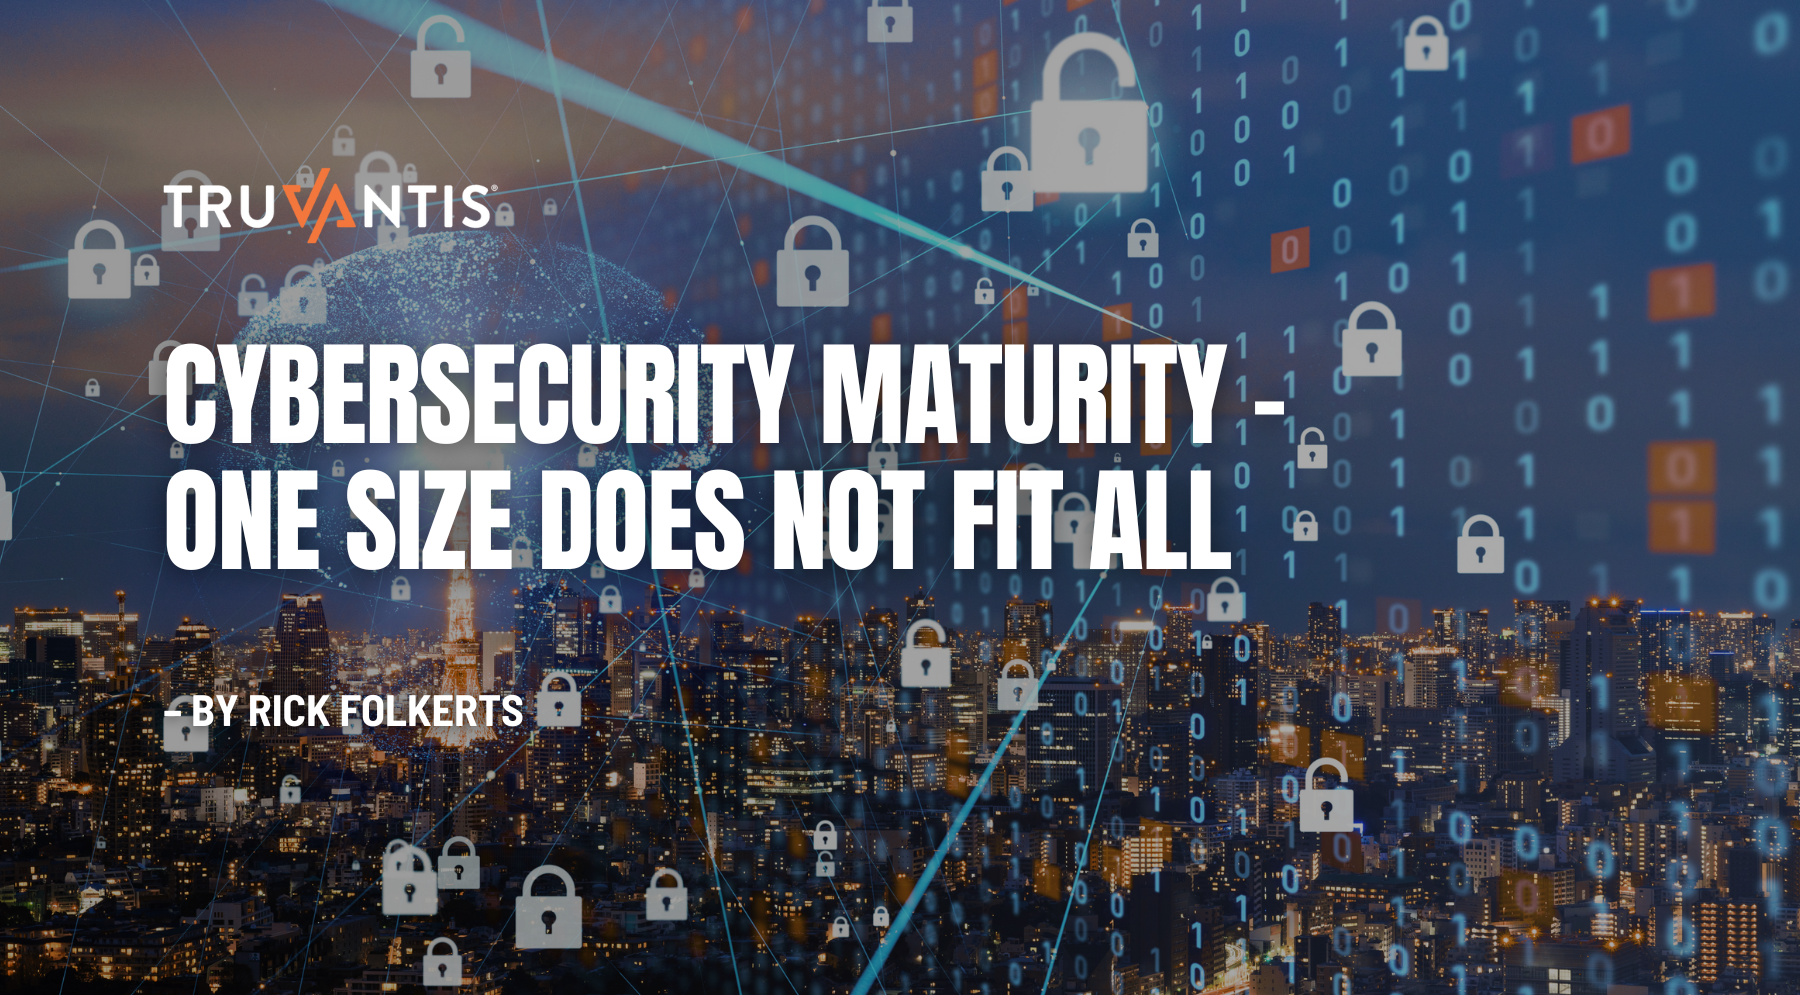 Truvantis - Cybersecurity Maturity - One Size Does Not Fit All 